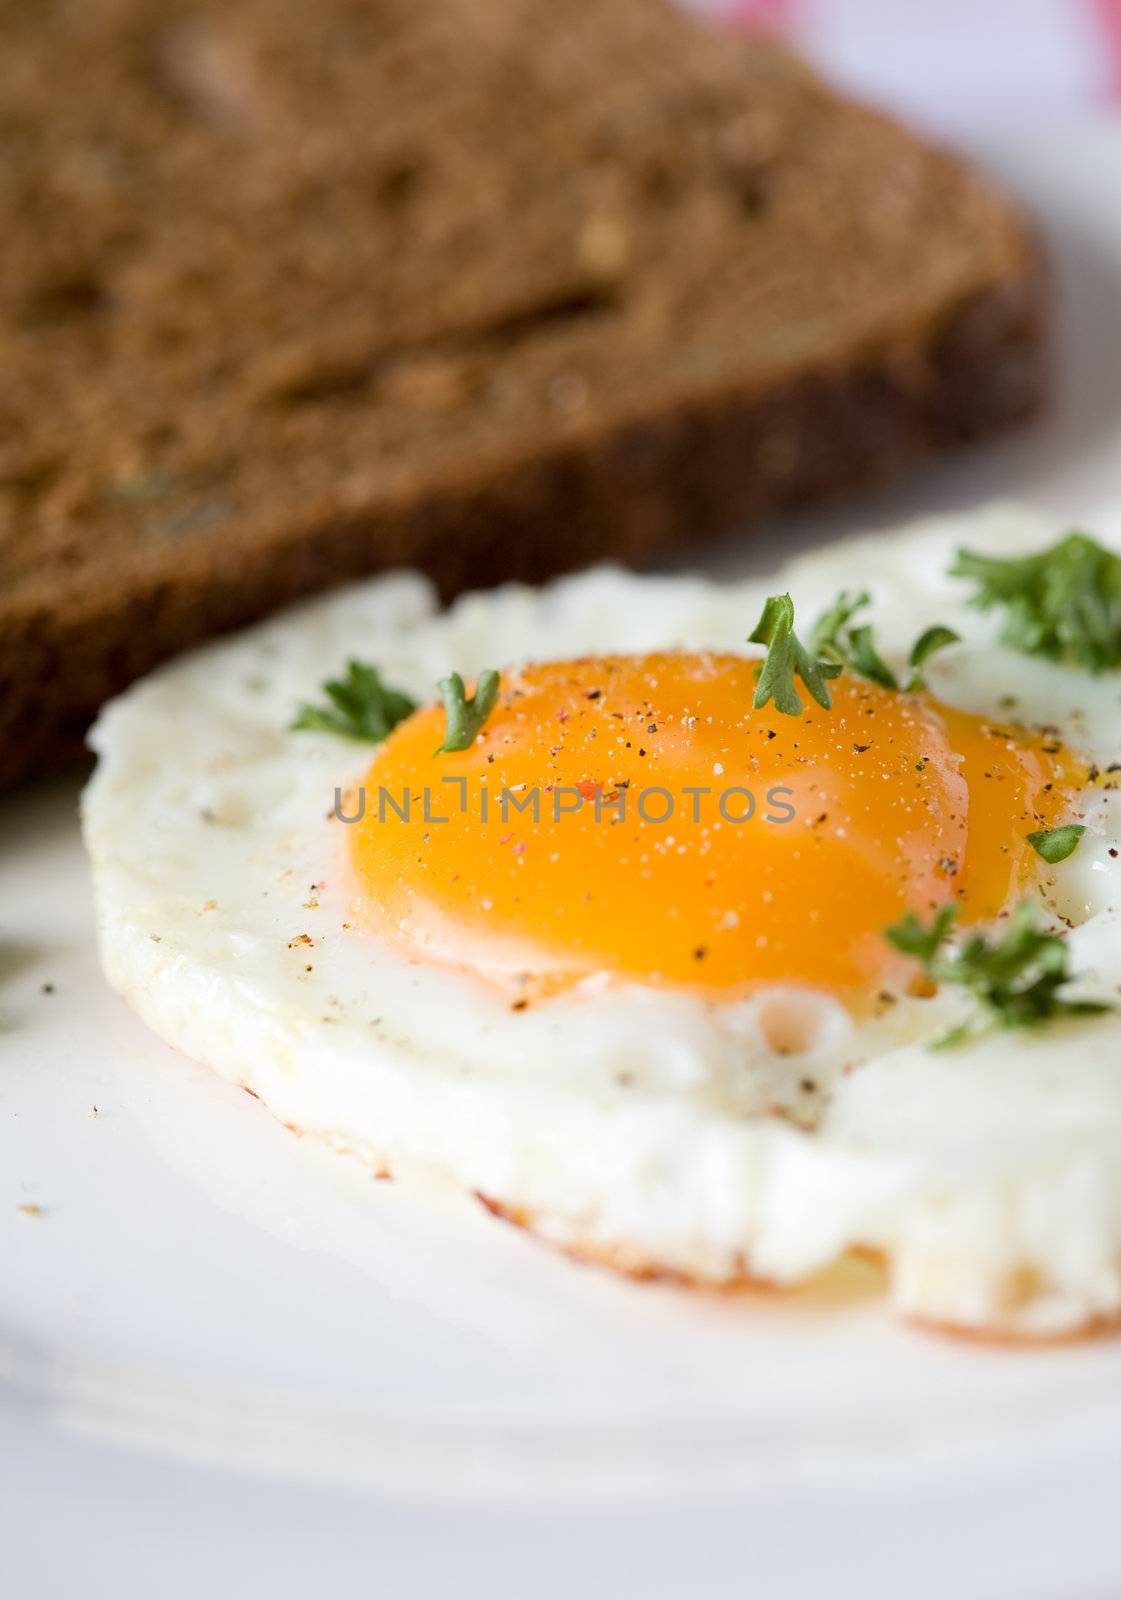 Fried egg with whole eggyolk and sandwich in background